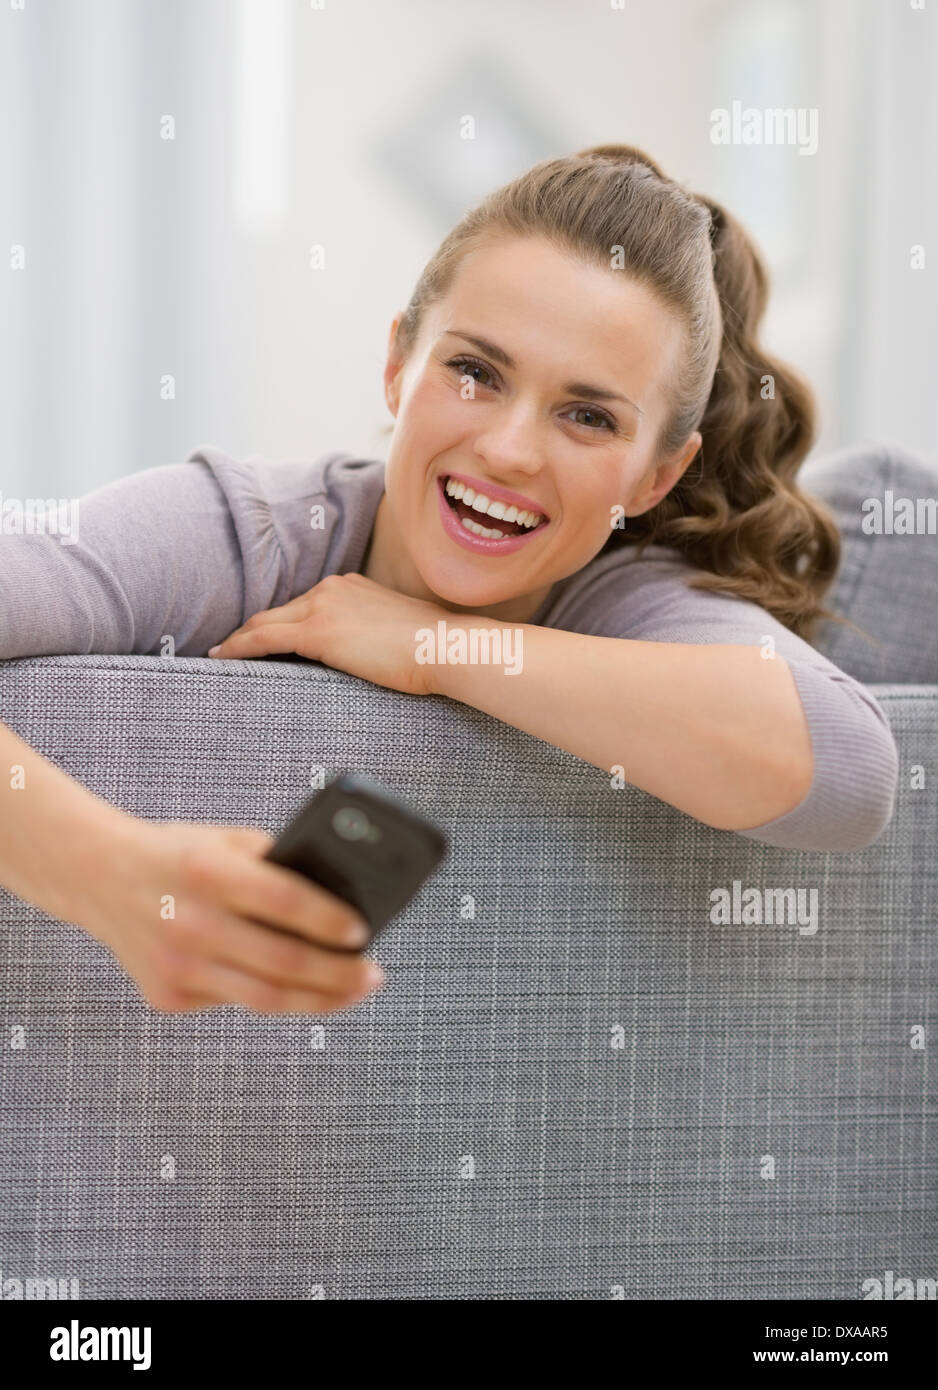 Portrait of young woman laying on sofa with phone Banque D'Images